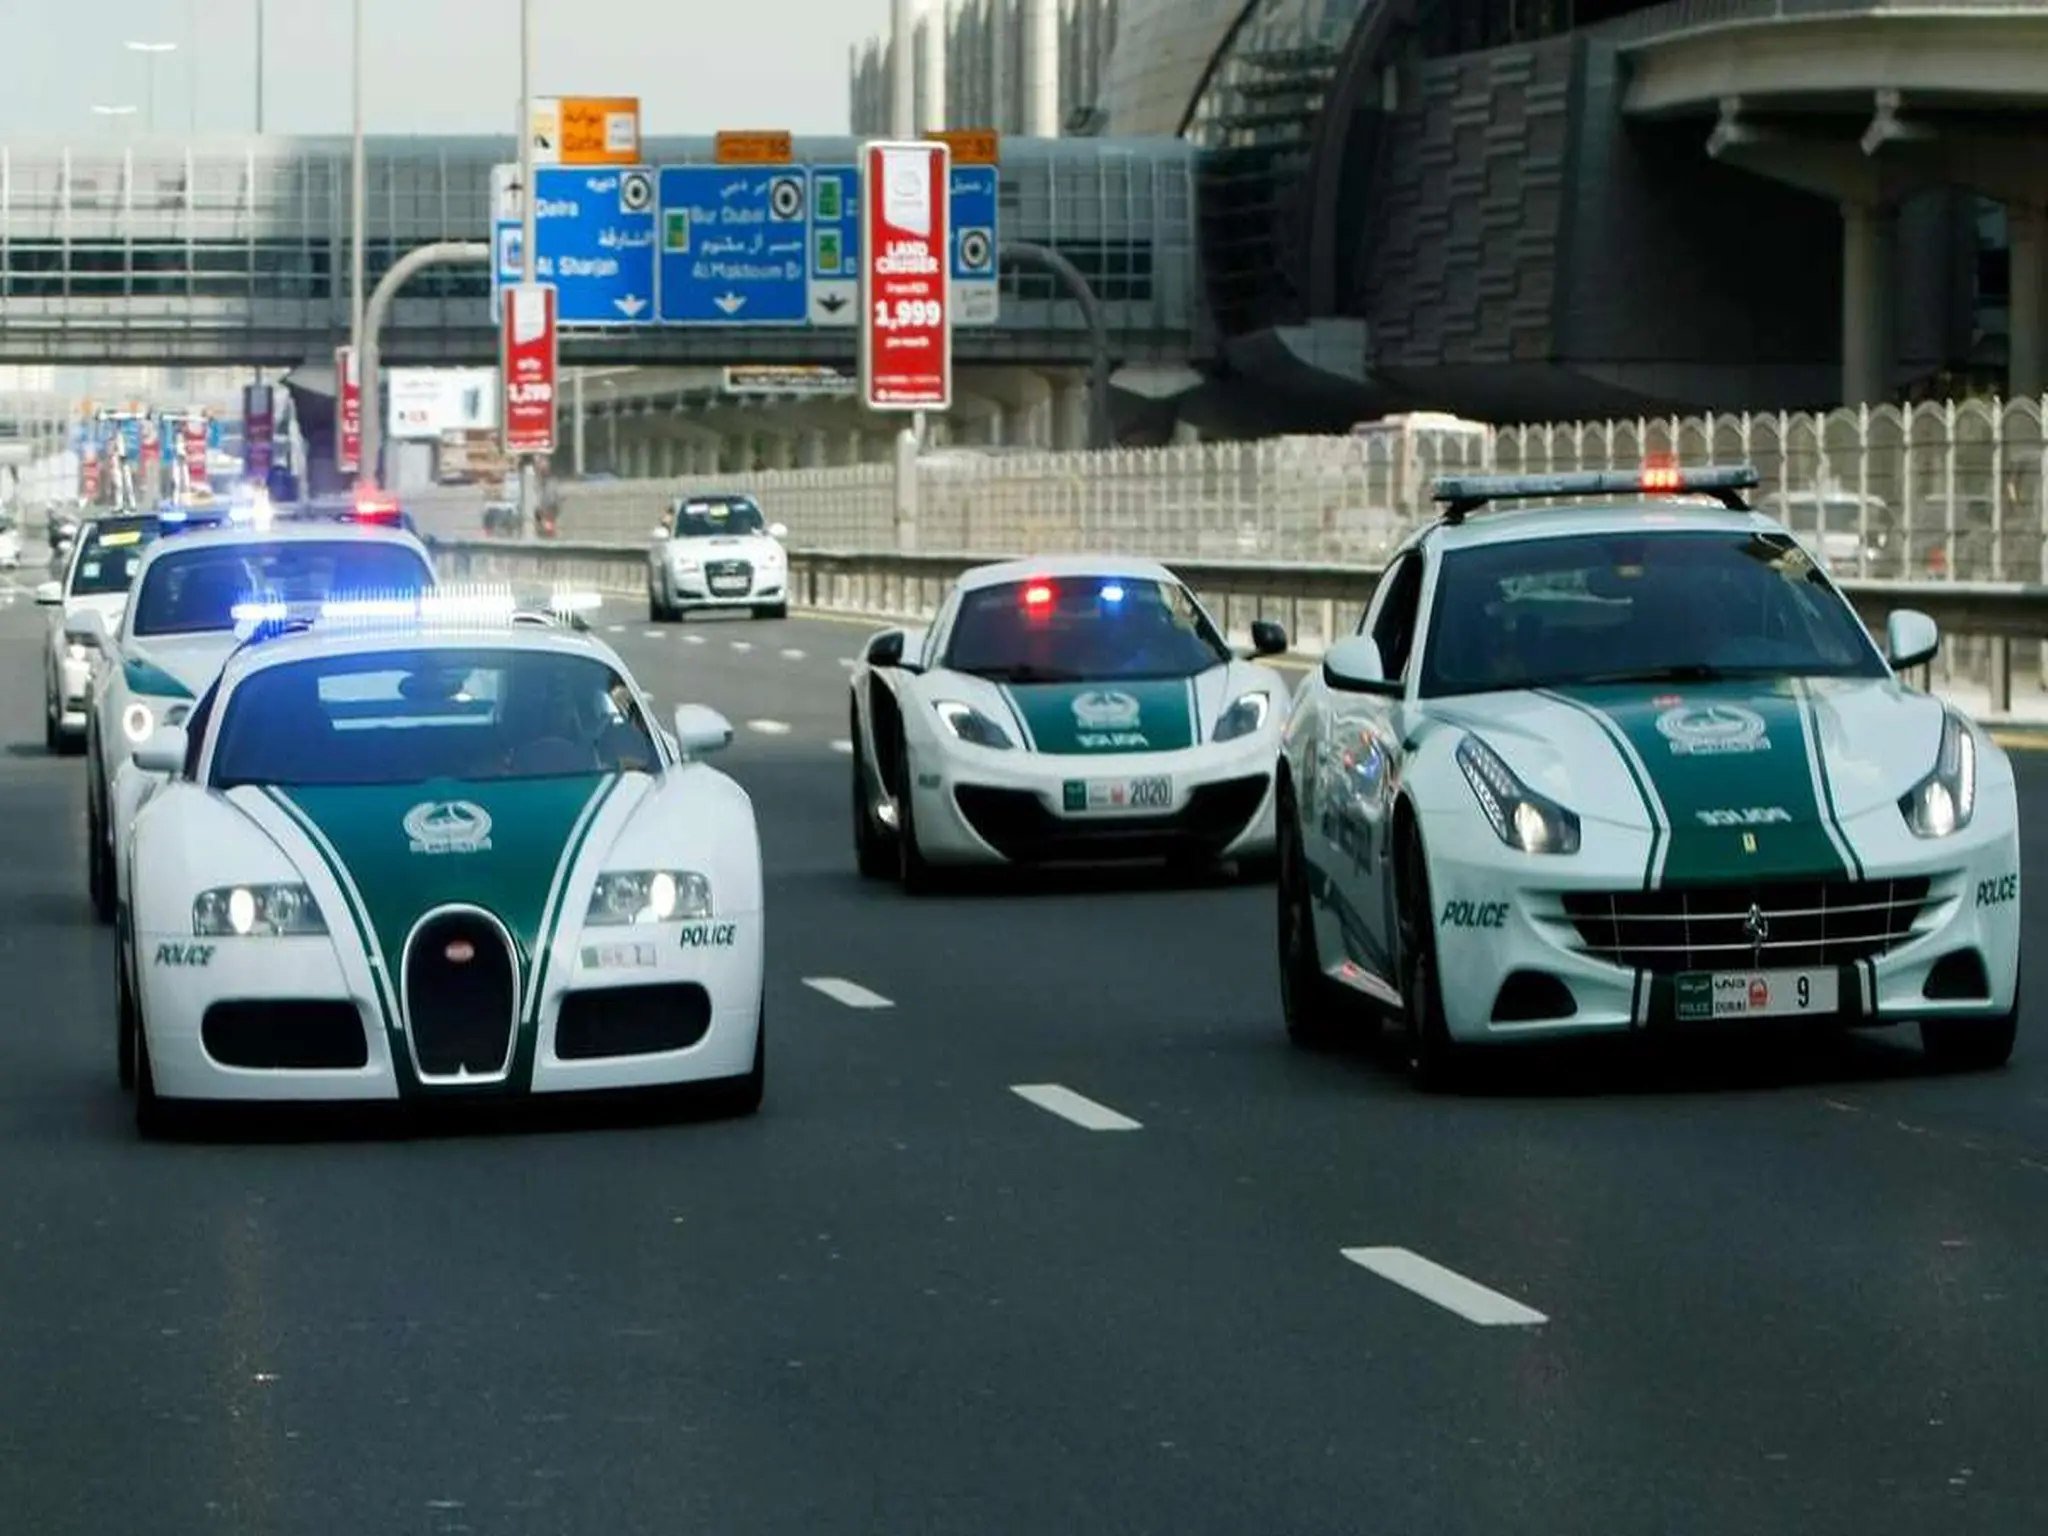 Dubai Police gives gifts to drivers and tells them the speed limits